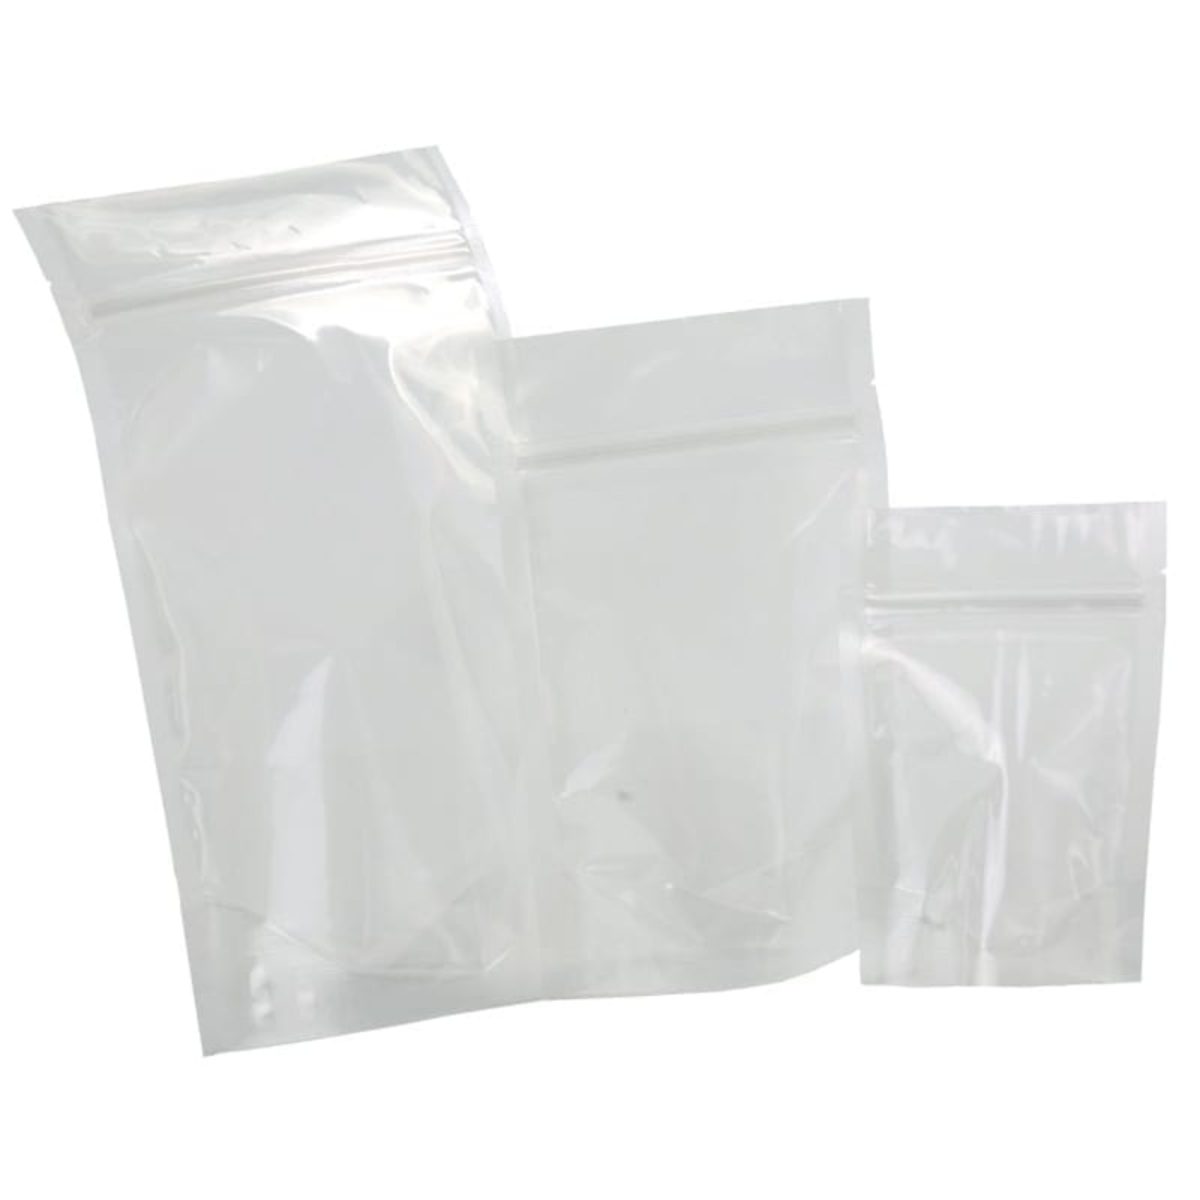 https://vacuumsealersunlimited.com/wp-content/uploads/2016/11/Clear-Stand-Up-Pouches-1200x1200.jpg